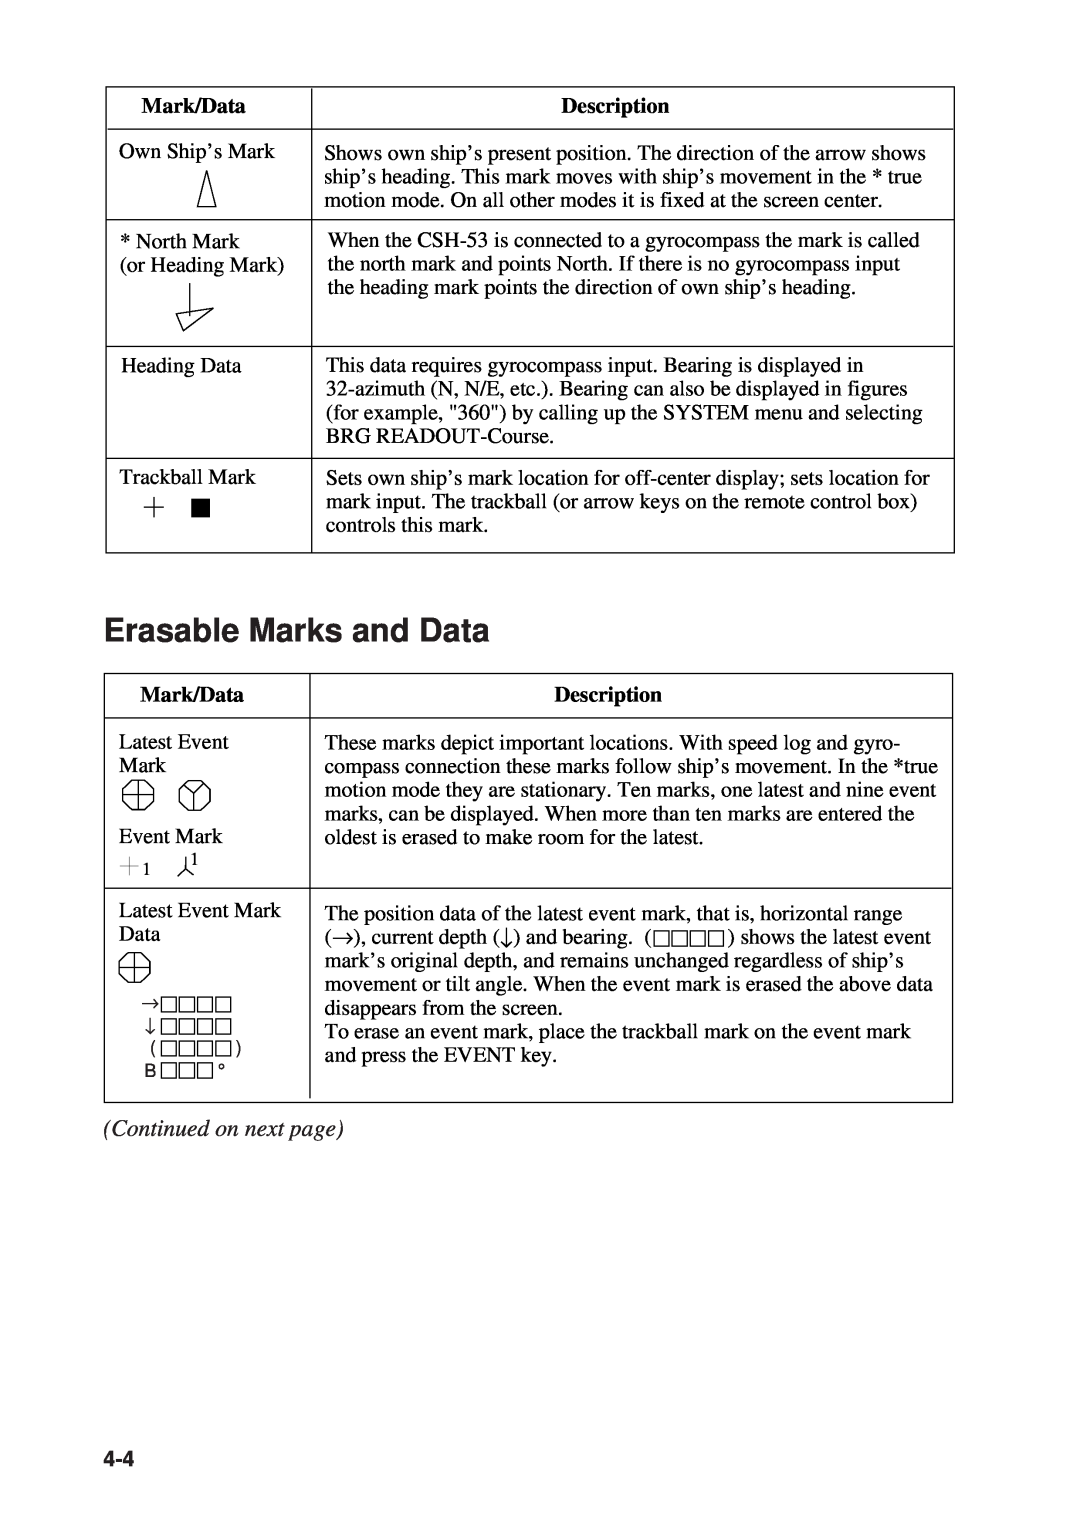 Furuno CSH-53 manual Erasable Marks and Data, Continued on next page, Mark/Data, Description 